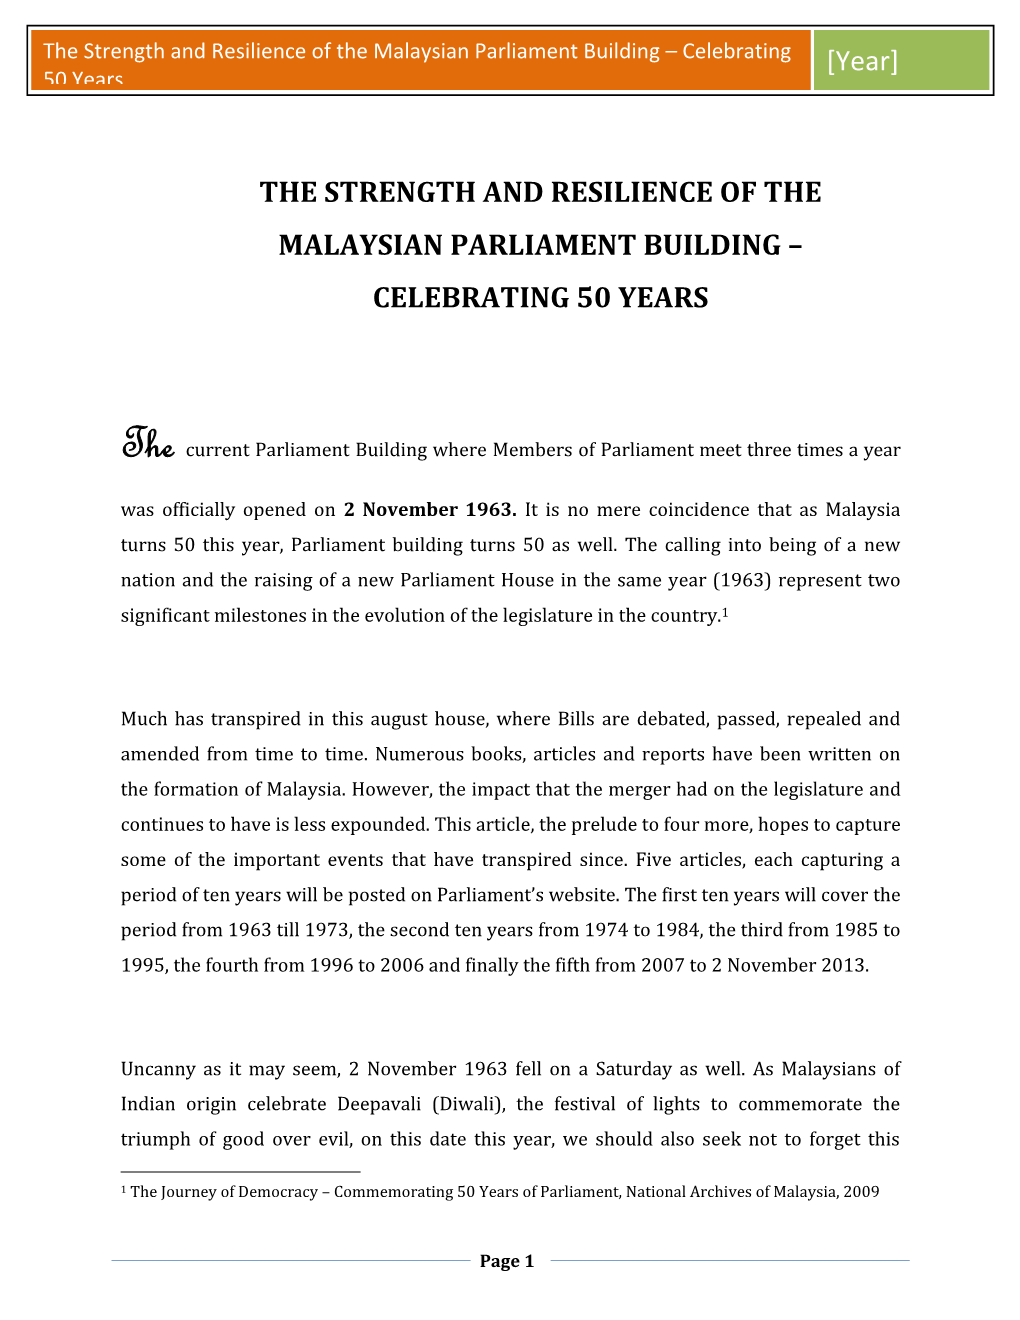 The Strength and Resilience of the Malaysian Parliament Building – Celebrating [Year] 50 Years